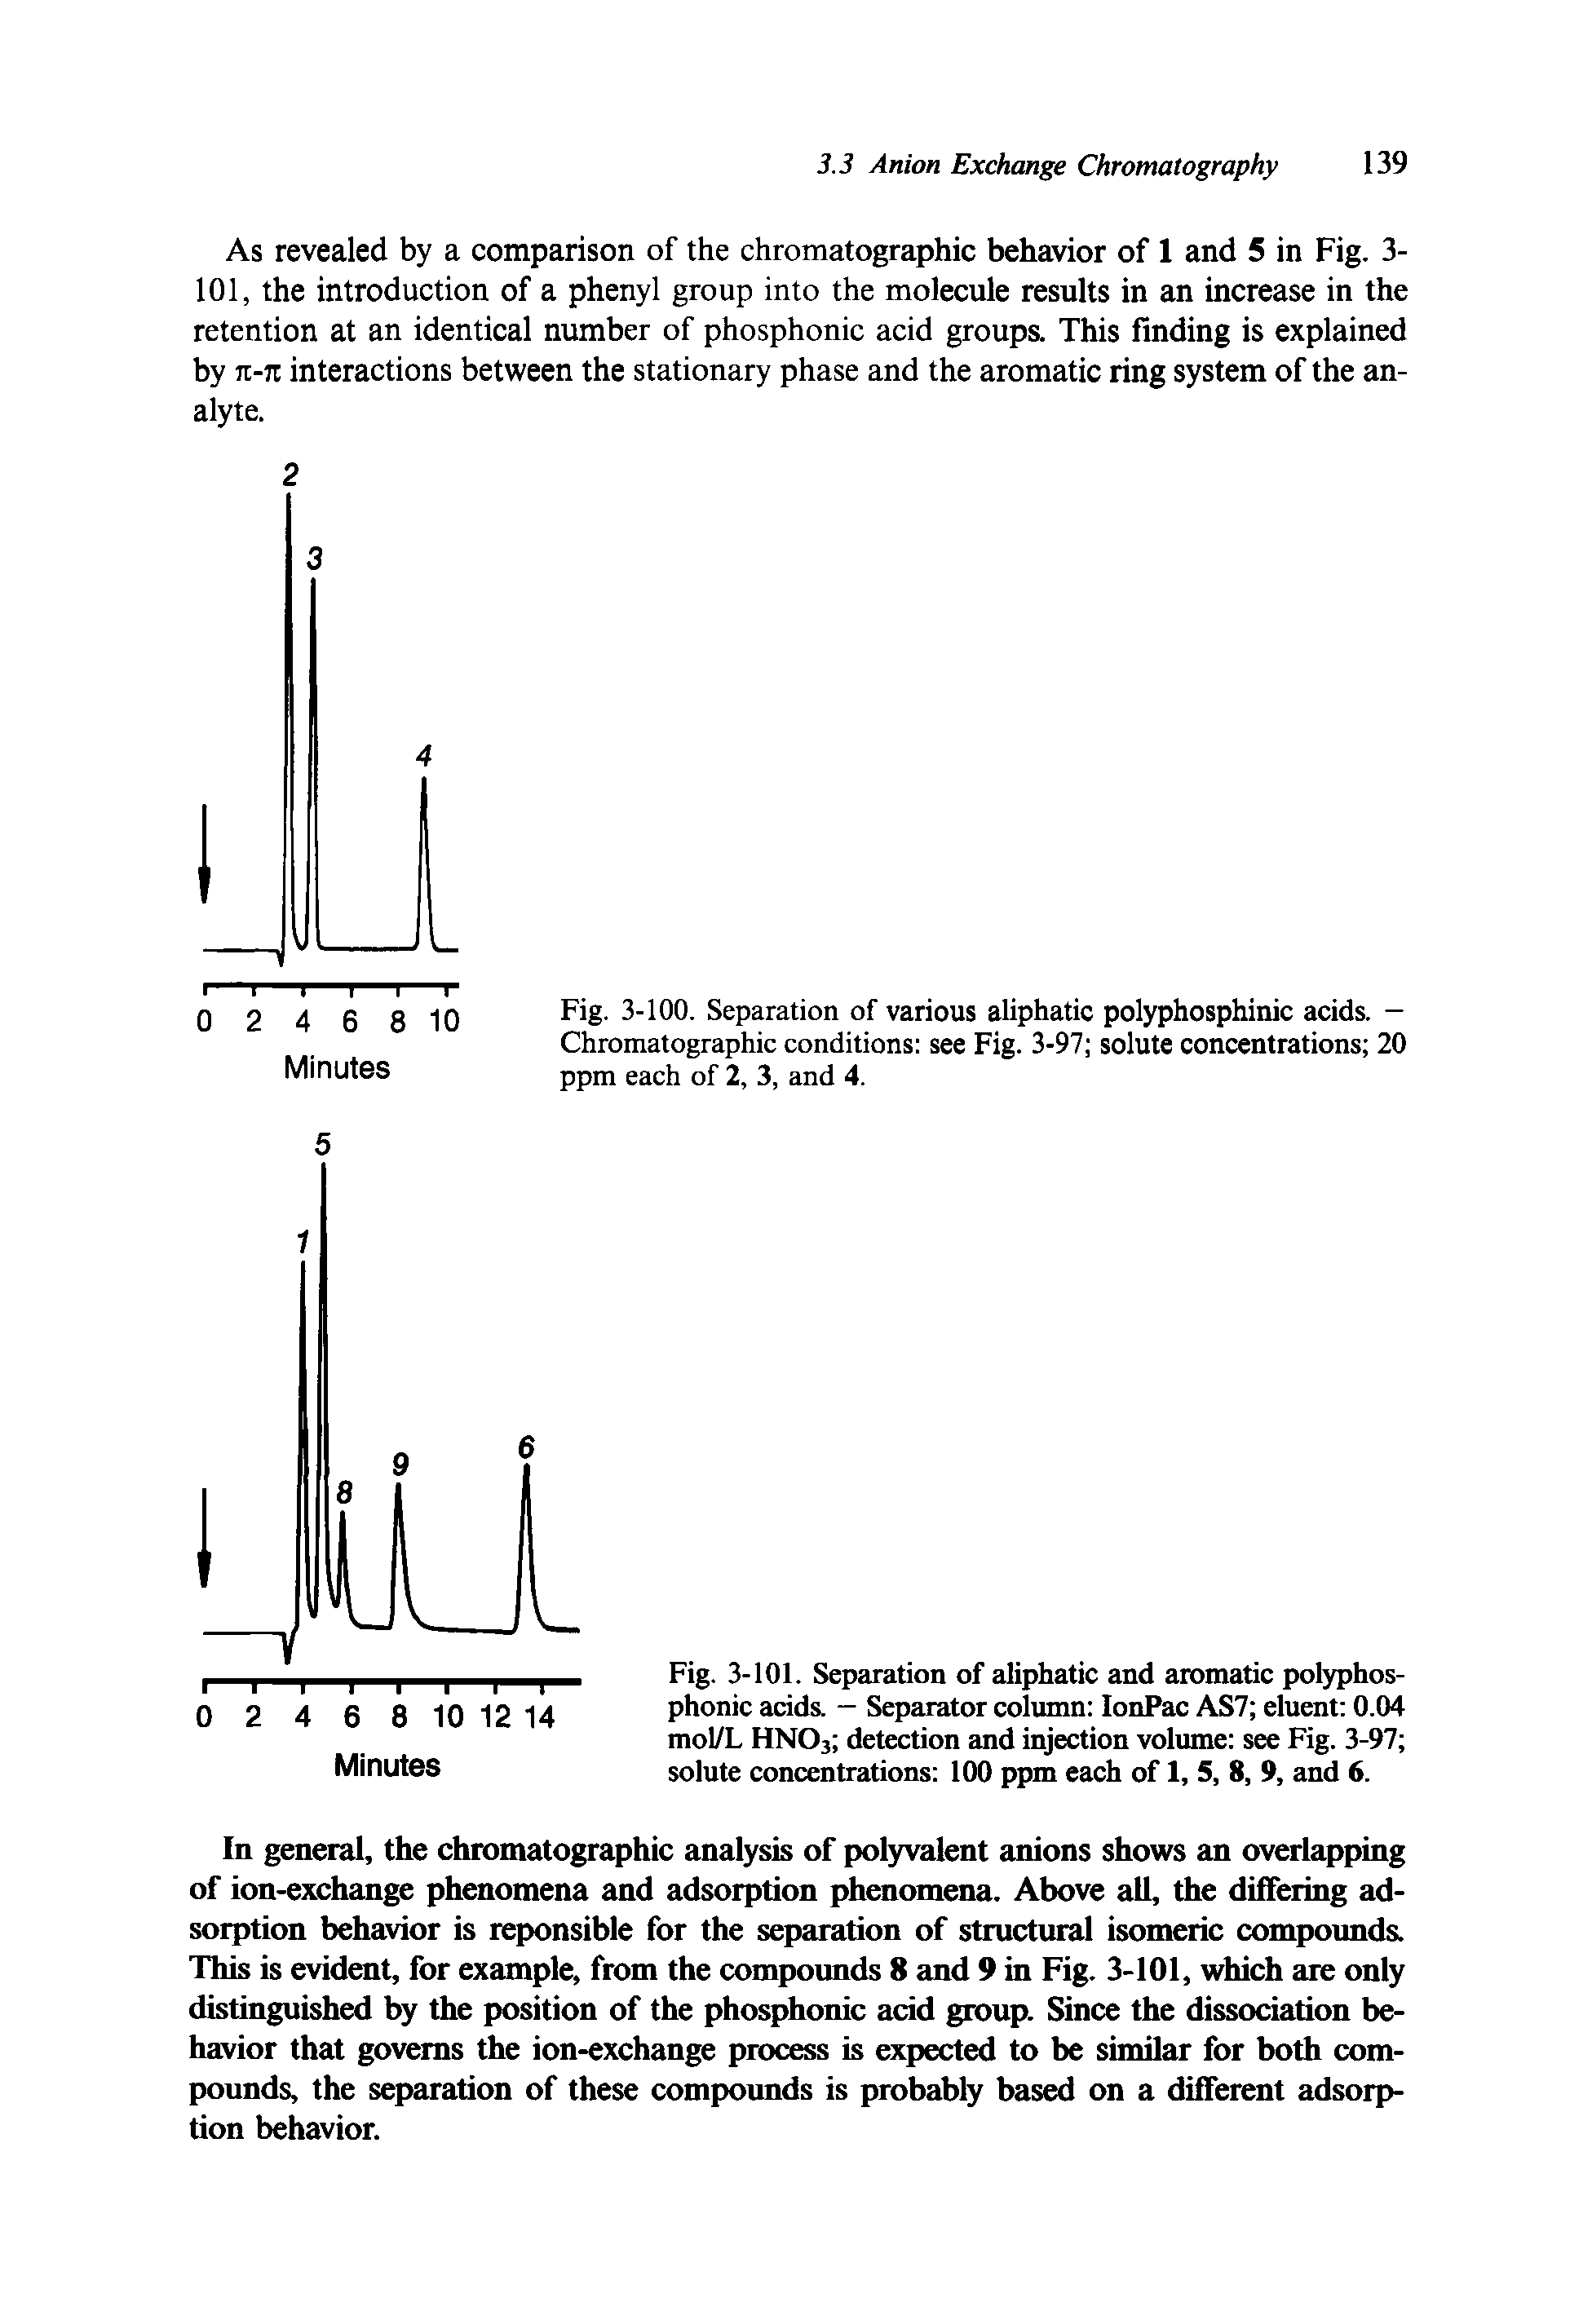 Fig. 3-101. Separation of aliphatic and aromatic polyphos-phonic acids. — Separator column IonPac AS7 eluent 0.04 mol/L HN03 detection and injection volume see Fig. 3-97 solute concentrations 100 ppm each of 1, 5, 8, 9, and 6.